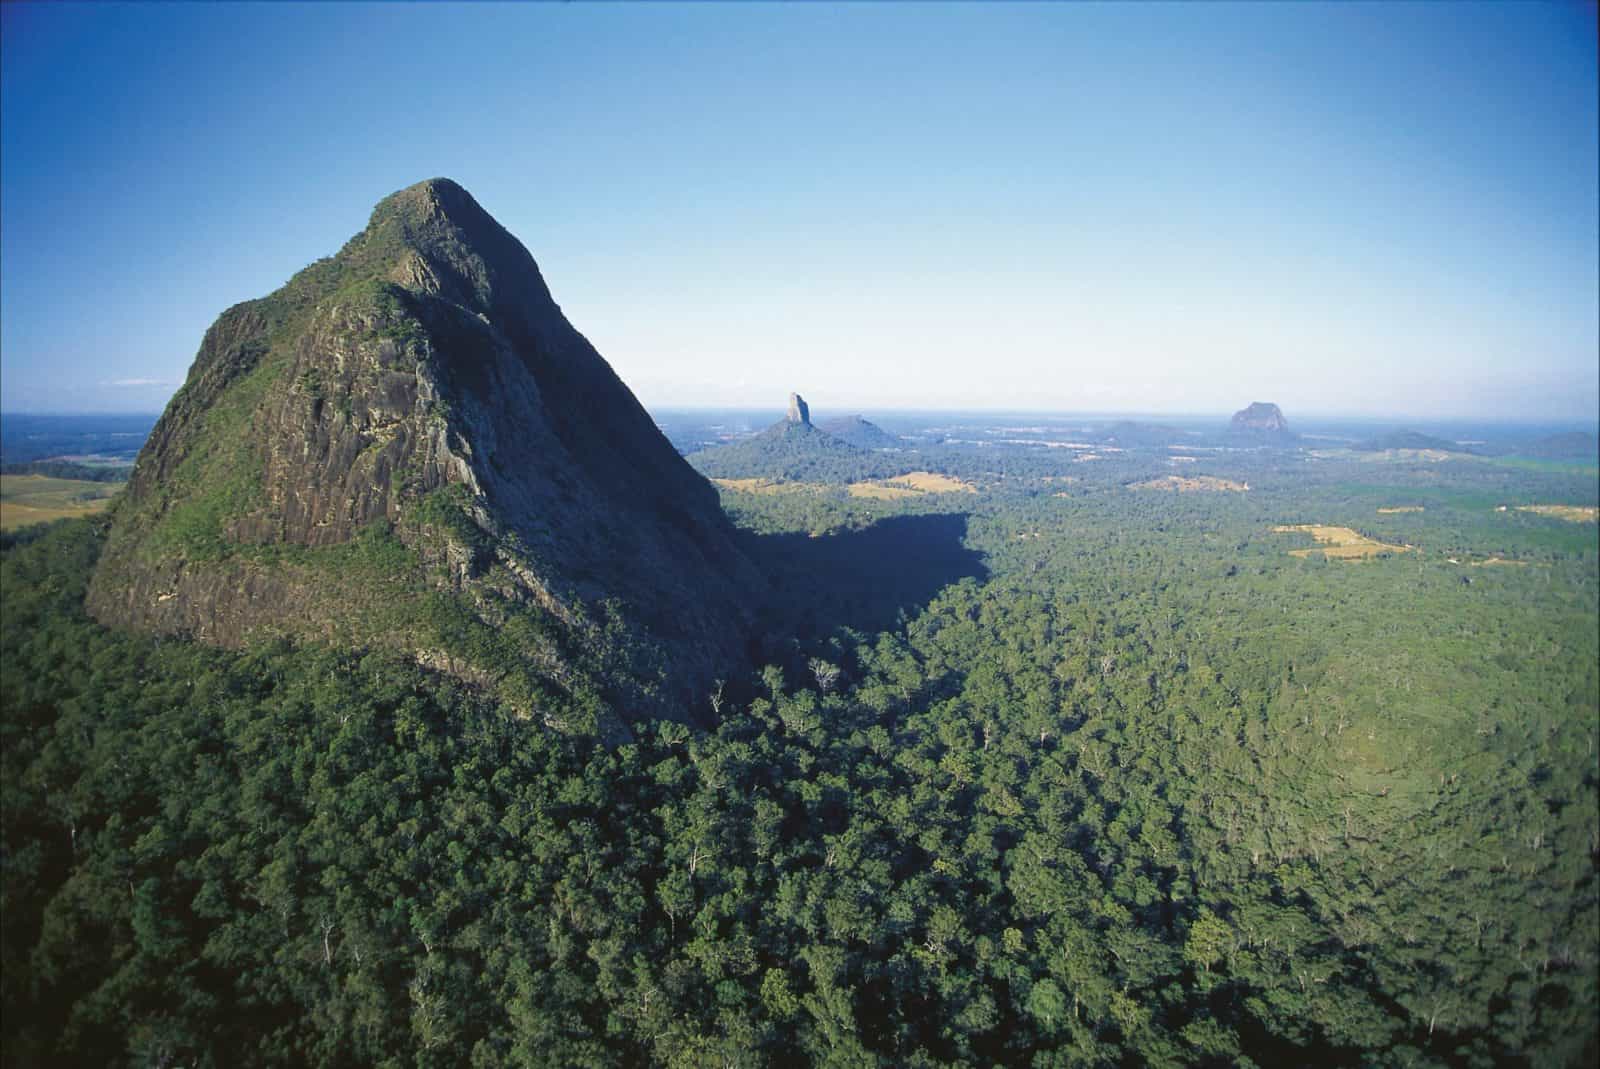 Mount Beerwah rising above surrounding forest.